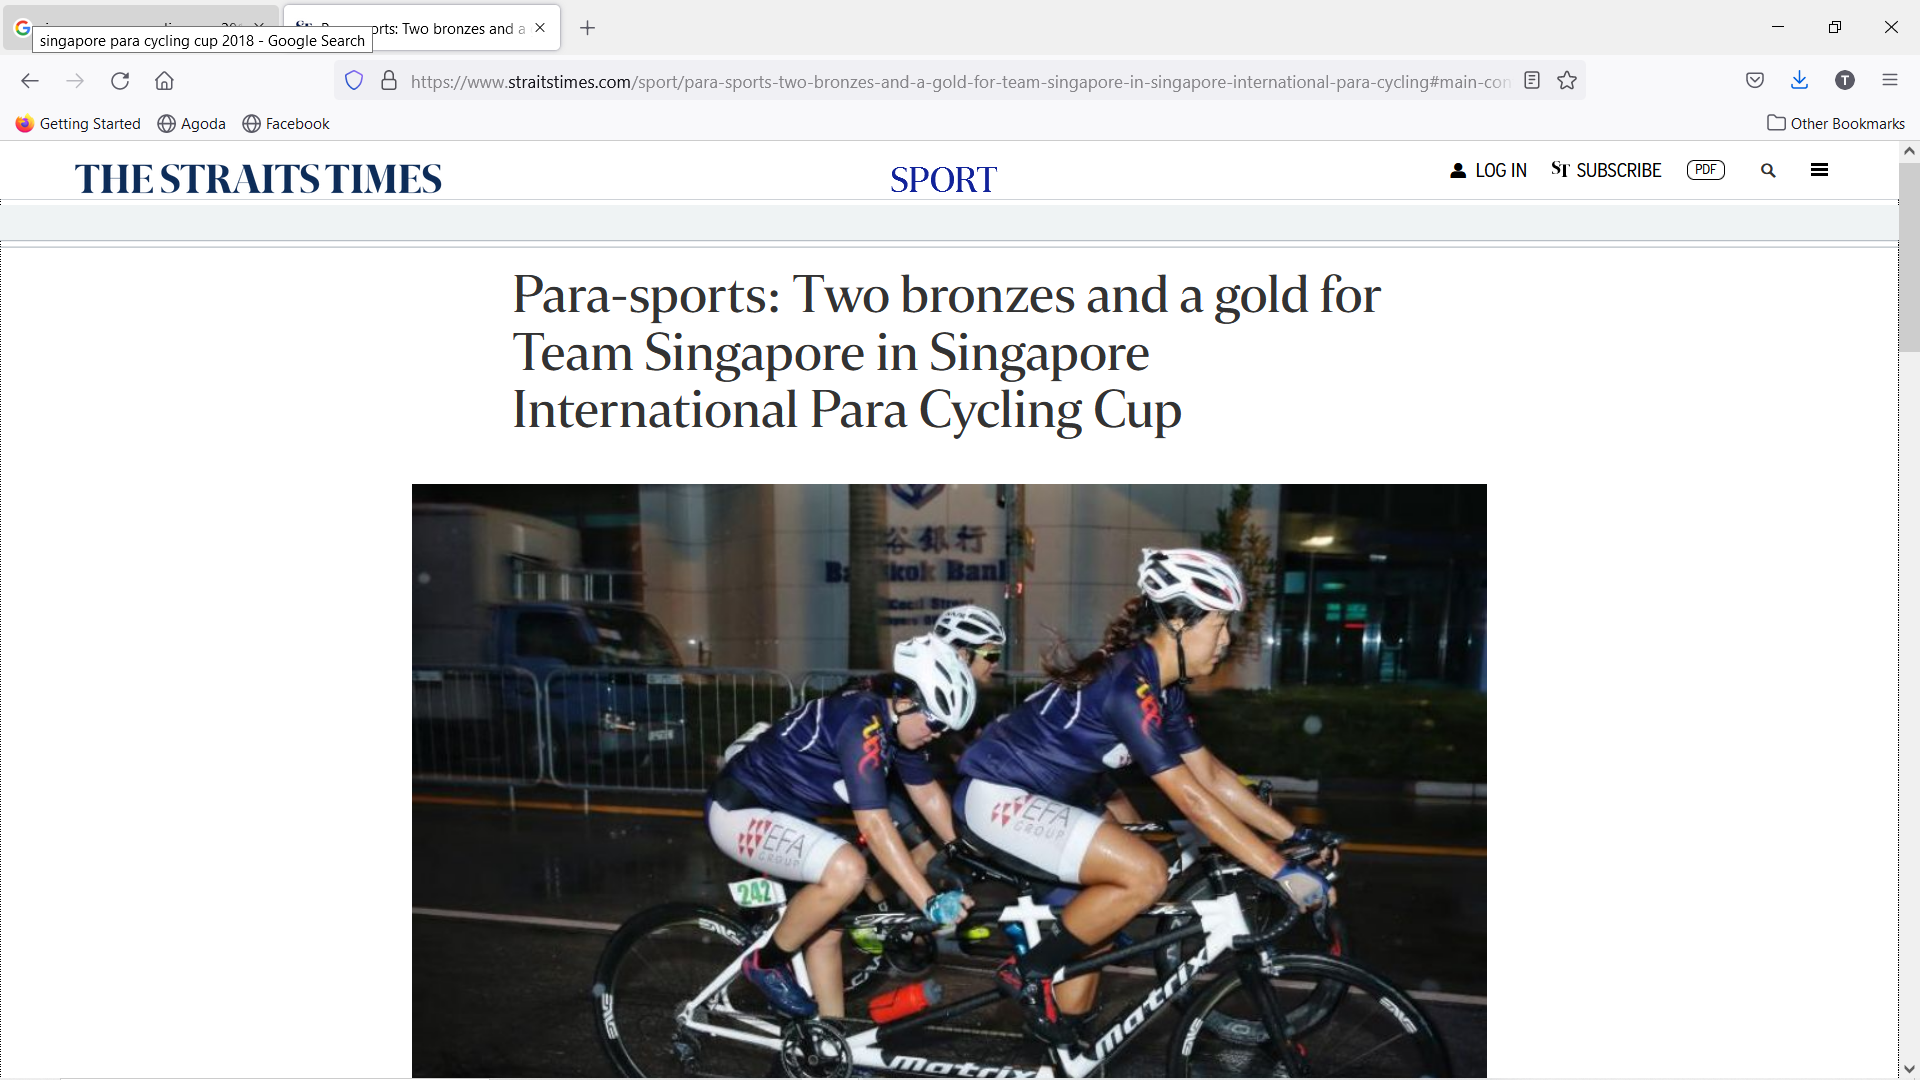 Para-sports: Two bronzes and a gold for Team Singapore in Singapore International Para Cycling Cup Screenshot